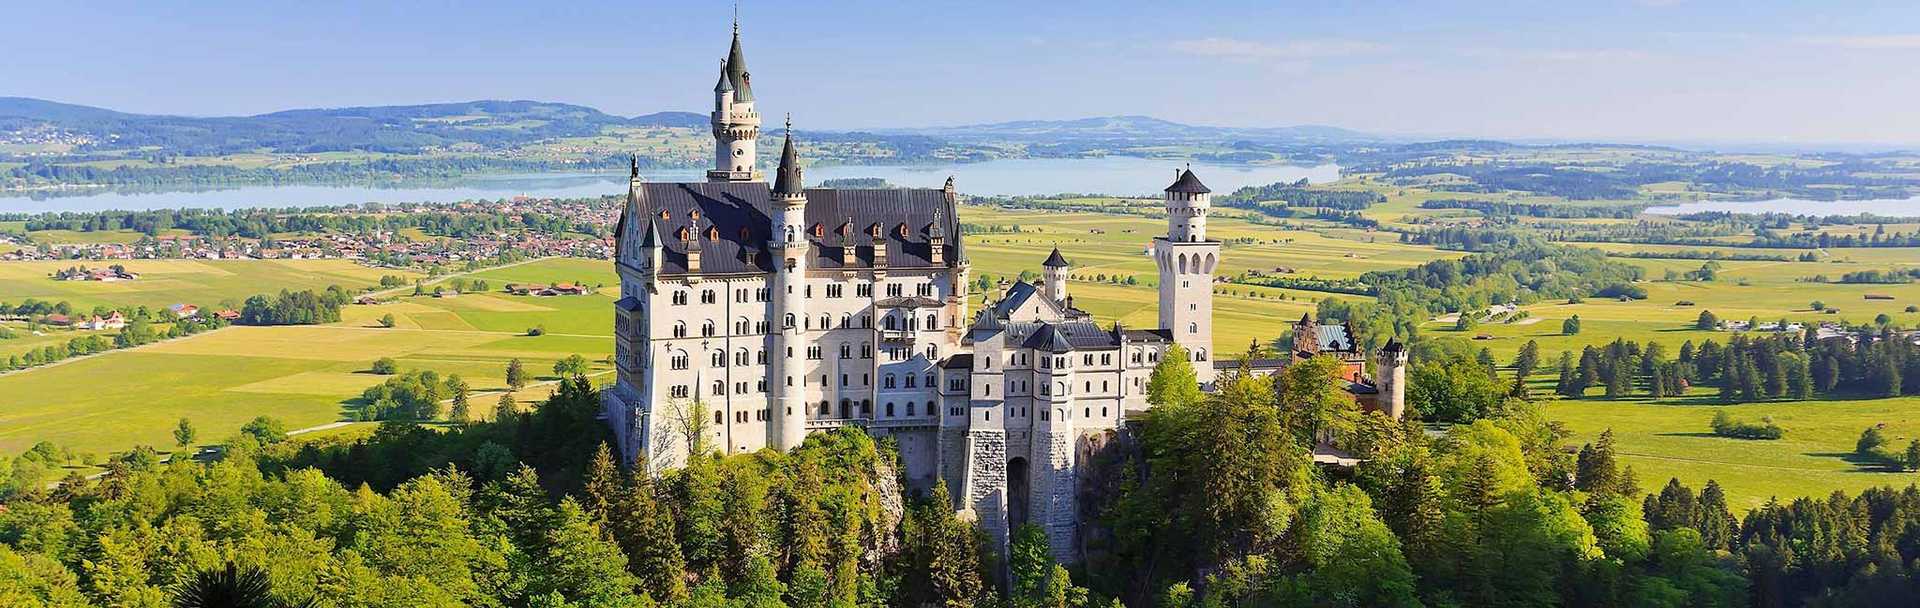 Best Germany Tours, Vacations & Travel Packages 20232024 Zicasso